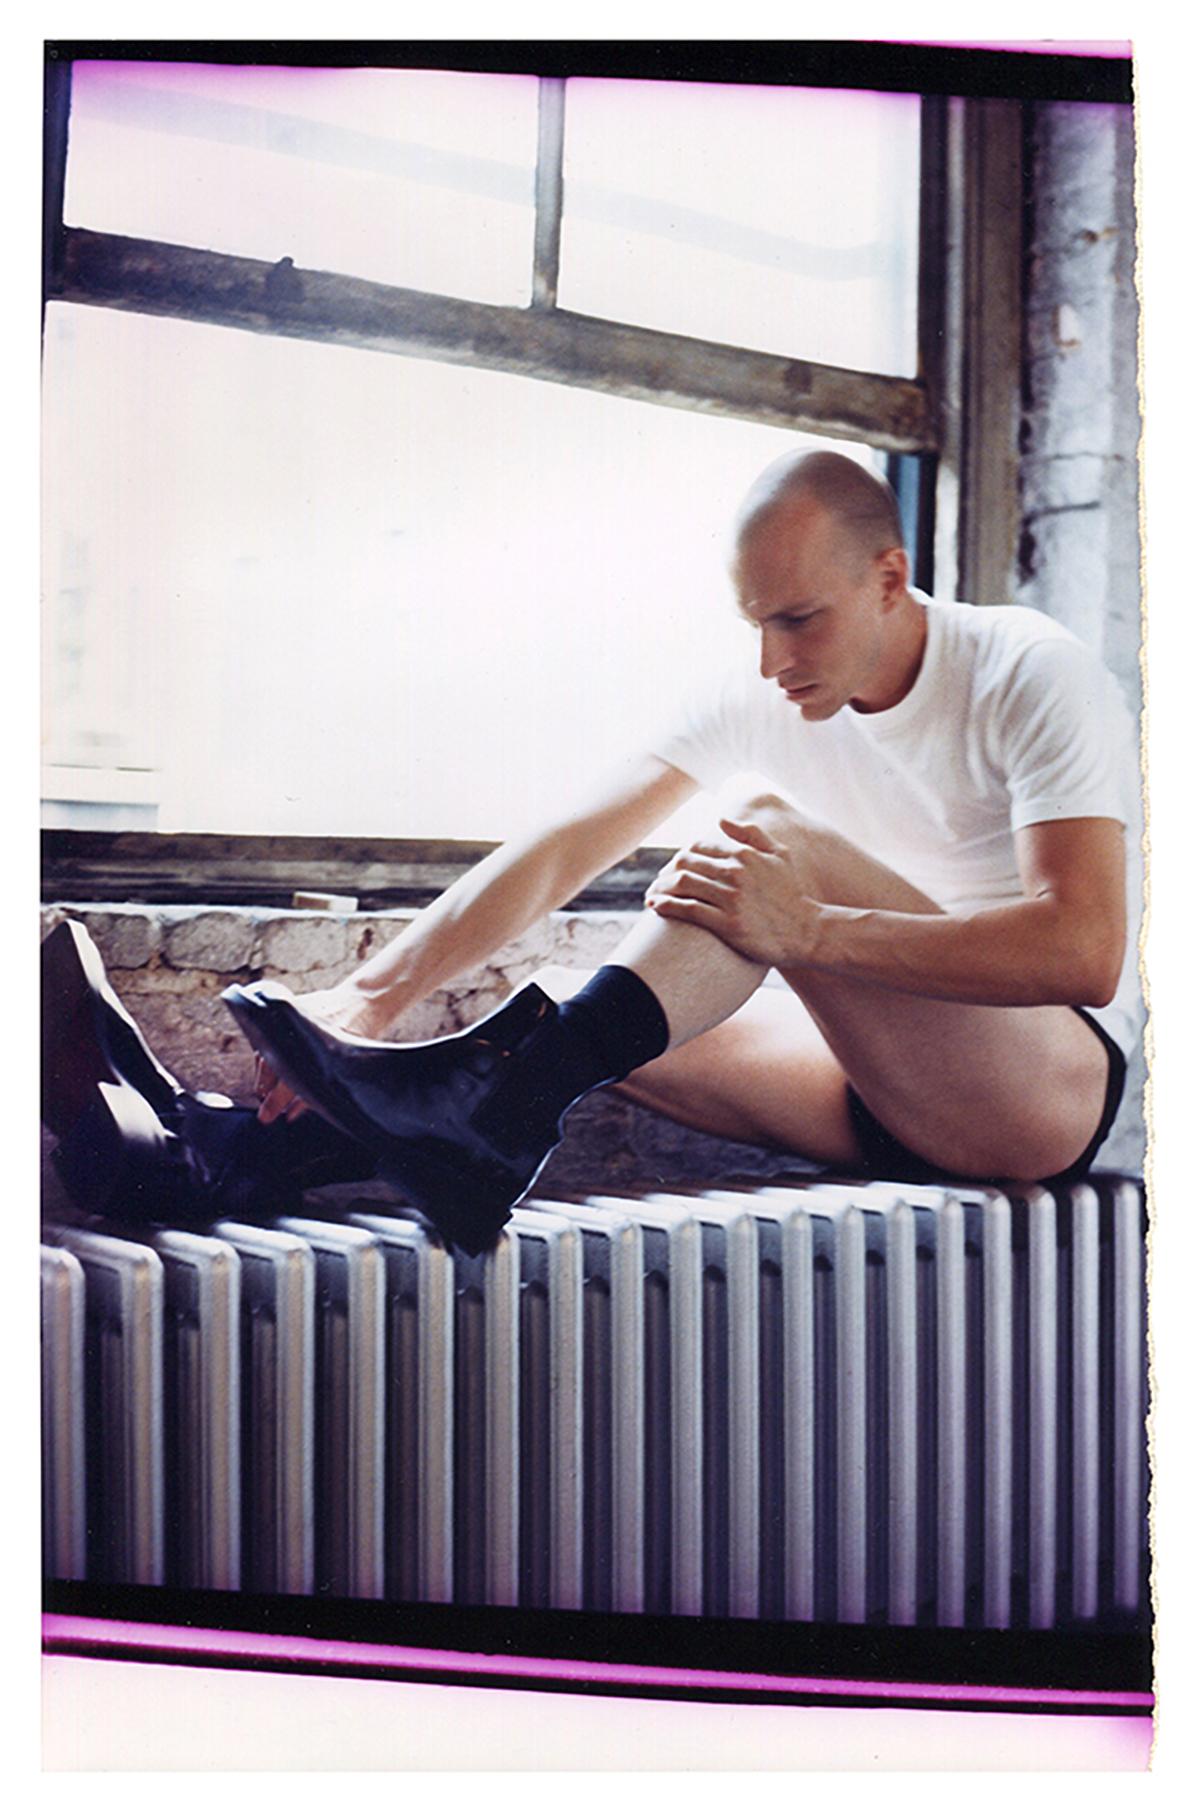 Untitled (Russ C. on Radiator with Boots/Matsuda Shoot) - Photograph by Jack Pierson